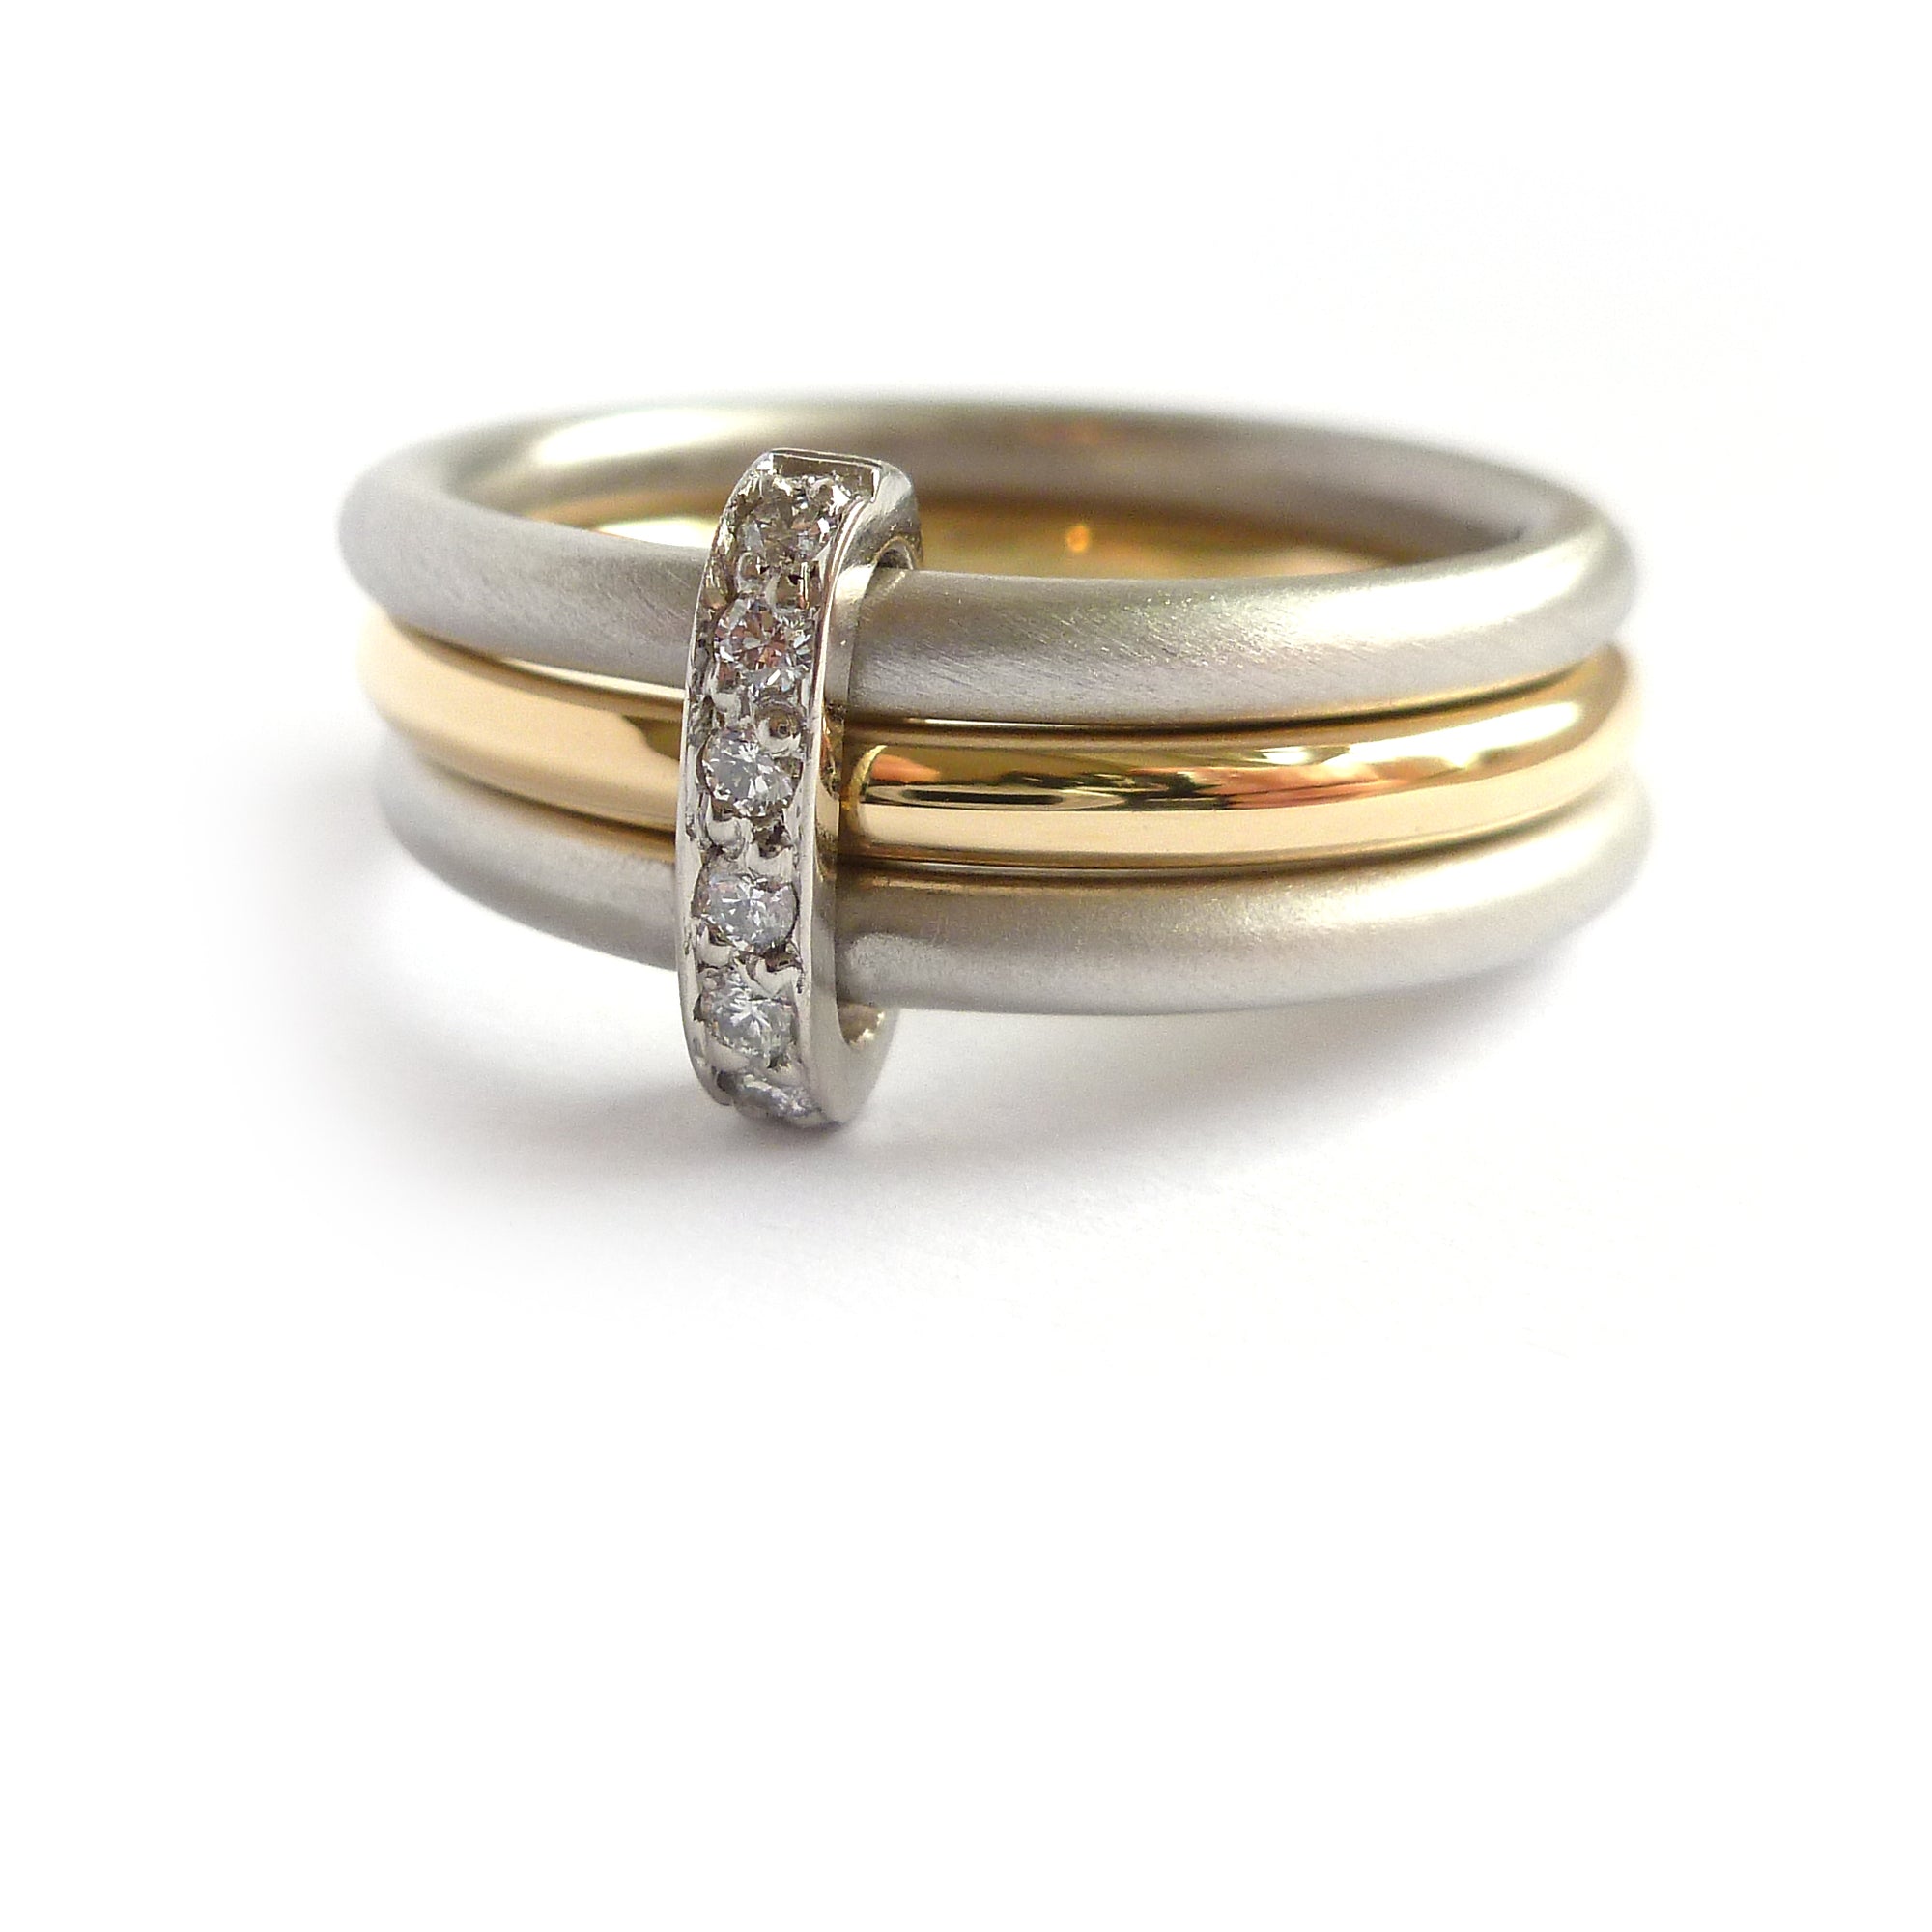 Contemporary two tone, platinum and yellow gold three band stacking ring with diamonds. Multi band ring or interlocking ring, sometimes called triple band rings too.